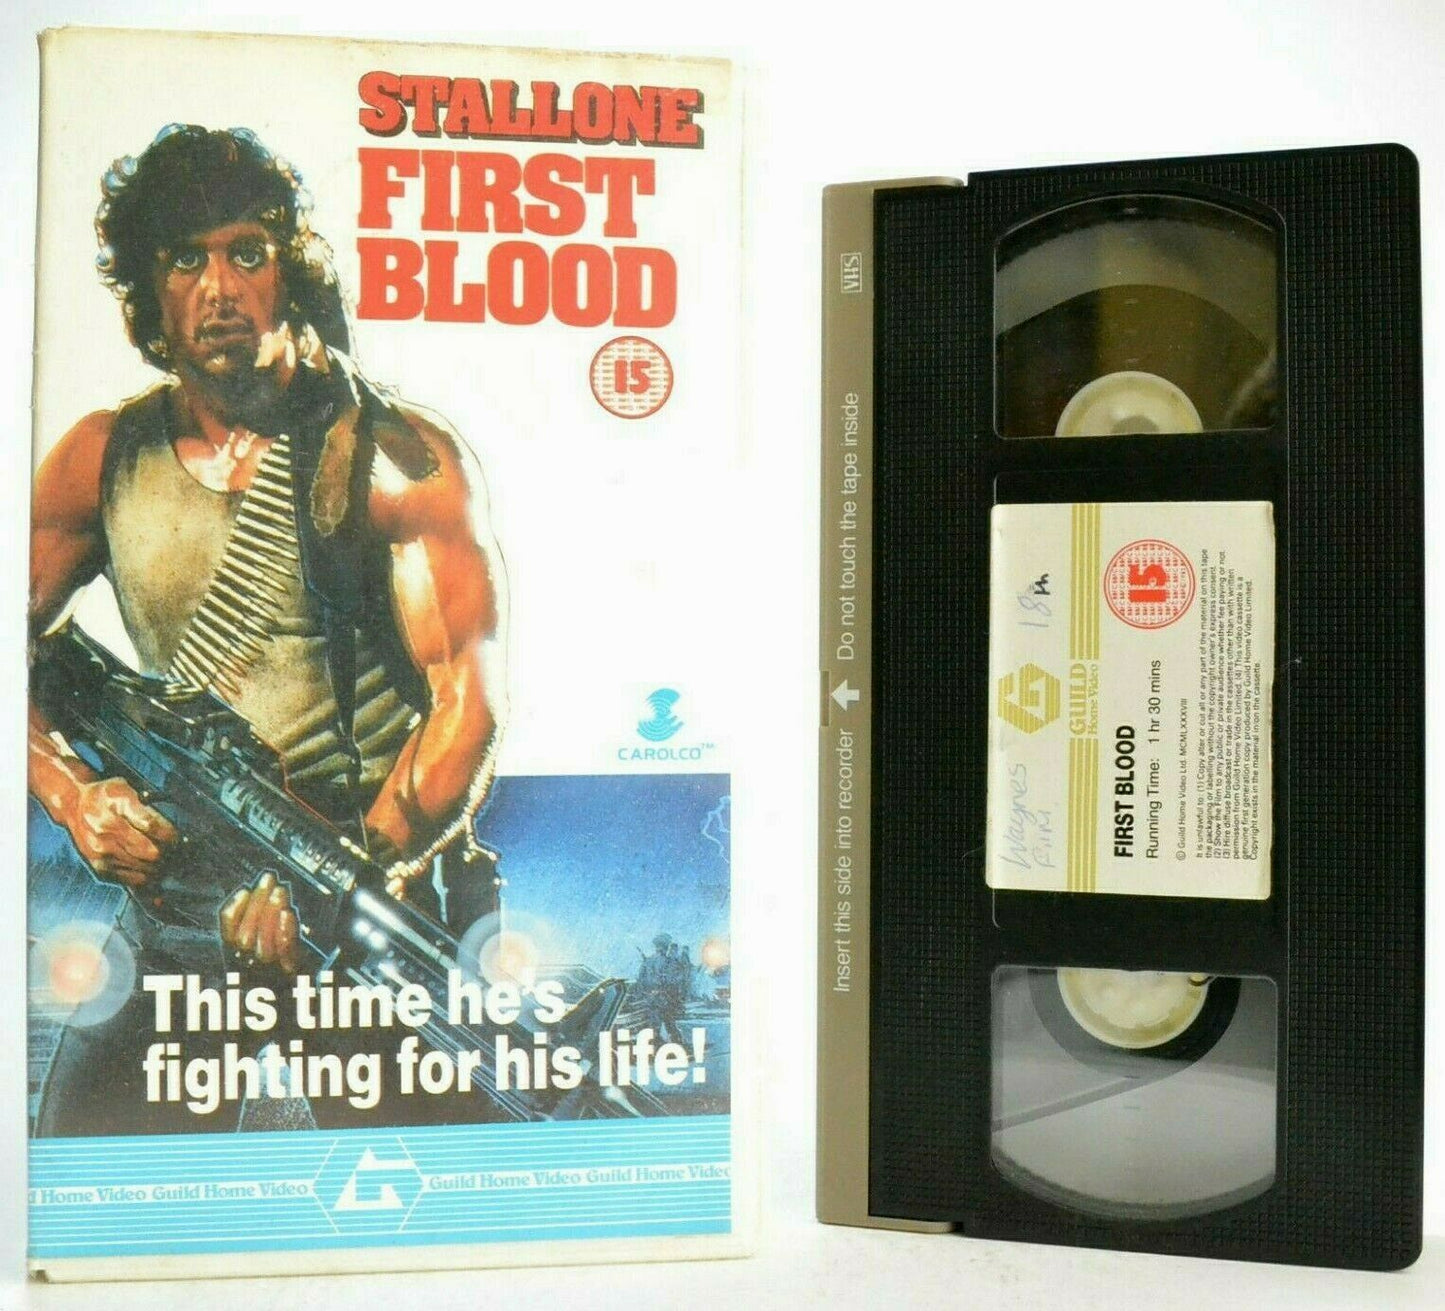 Rambo 1 First Blood - Iconic Sleeve Art - Stallone - Original 1988 - Guild - VHS-